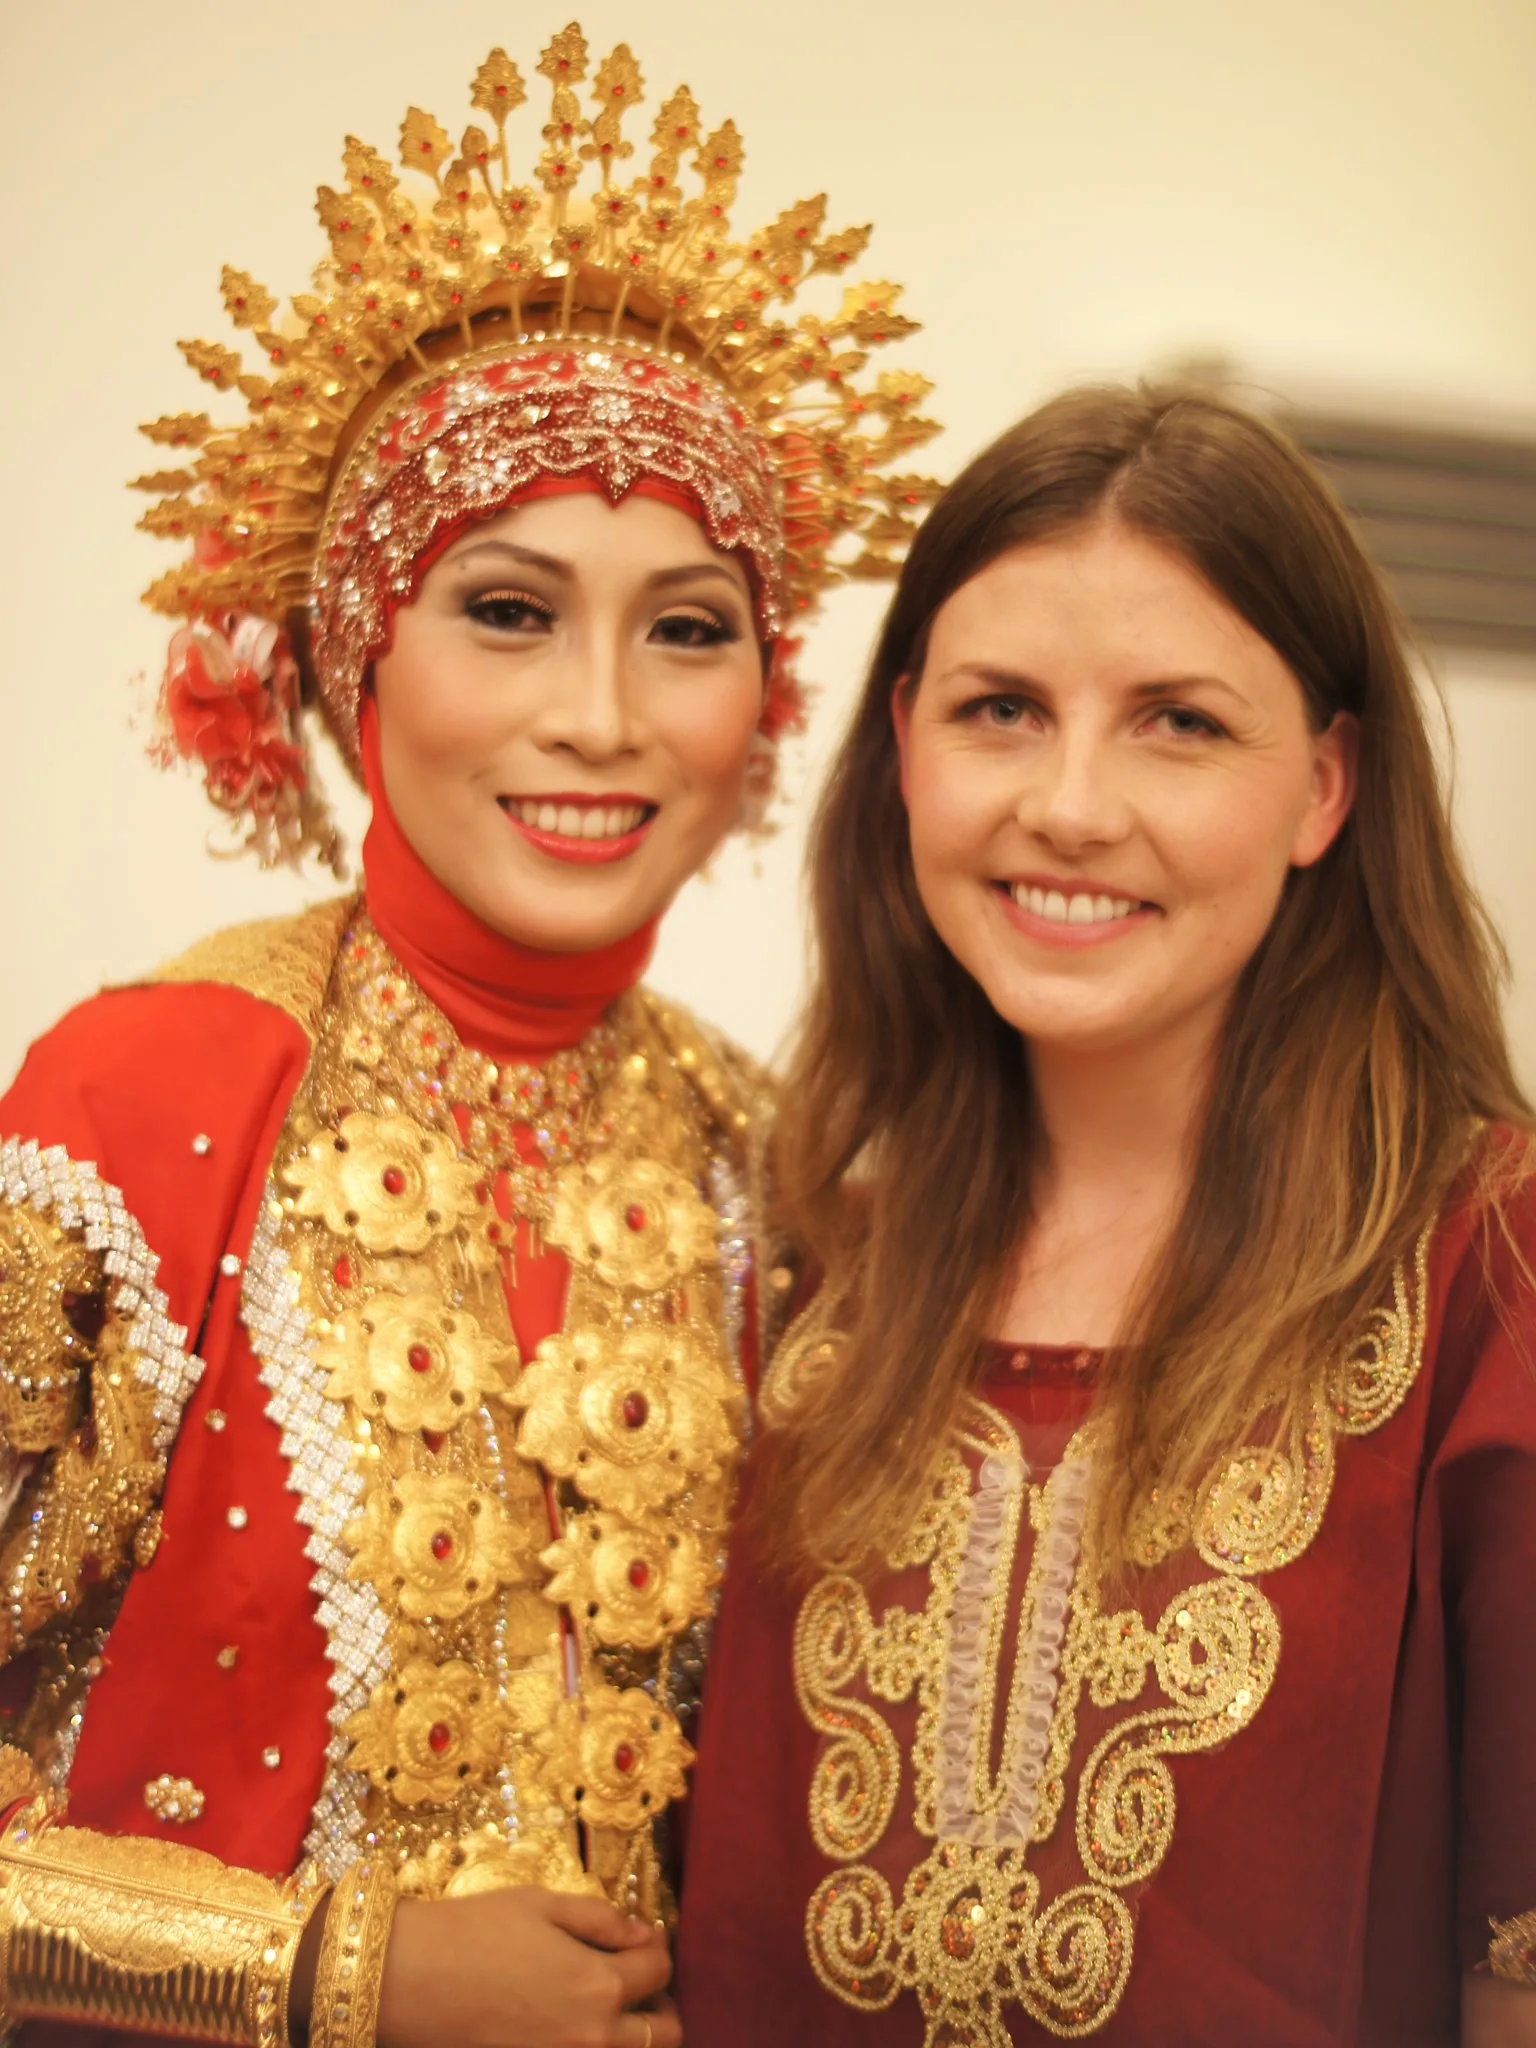 Friends for 12 years. Jessica wearing the traditional "baju bodo" with the stunning bride-to-be.